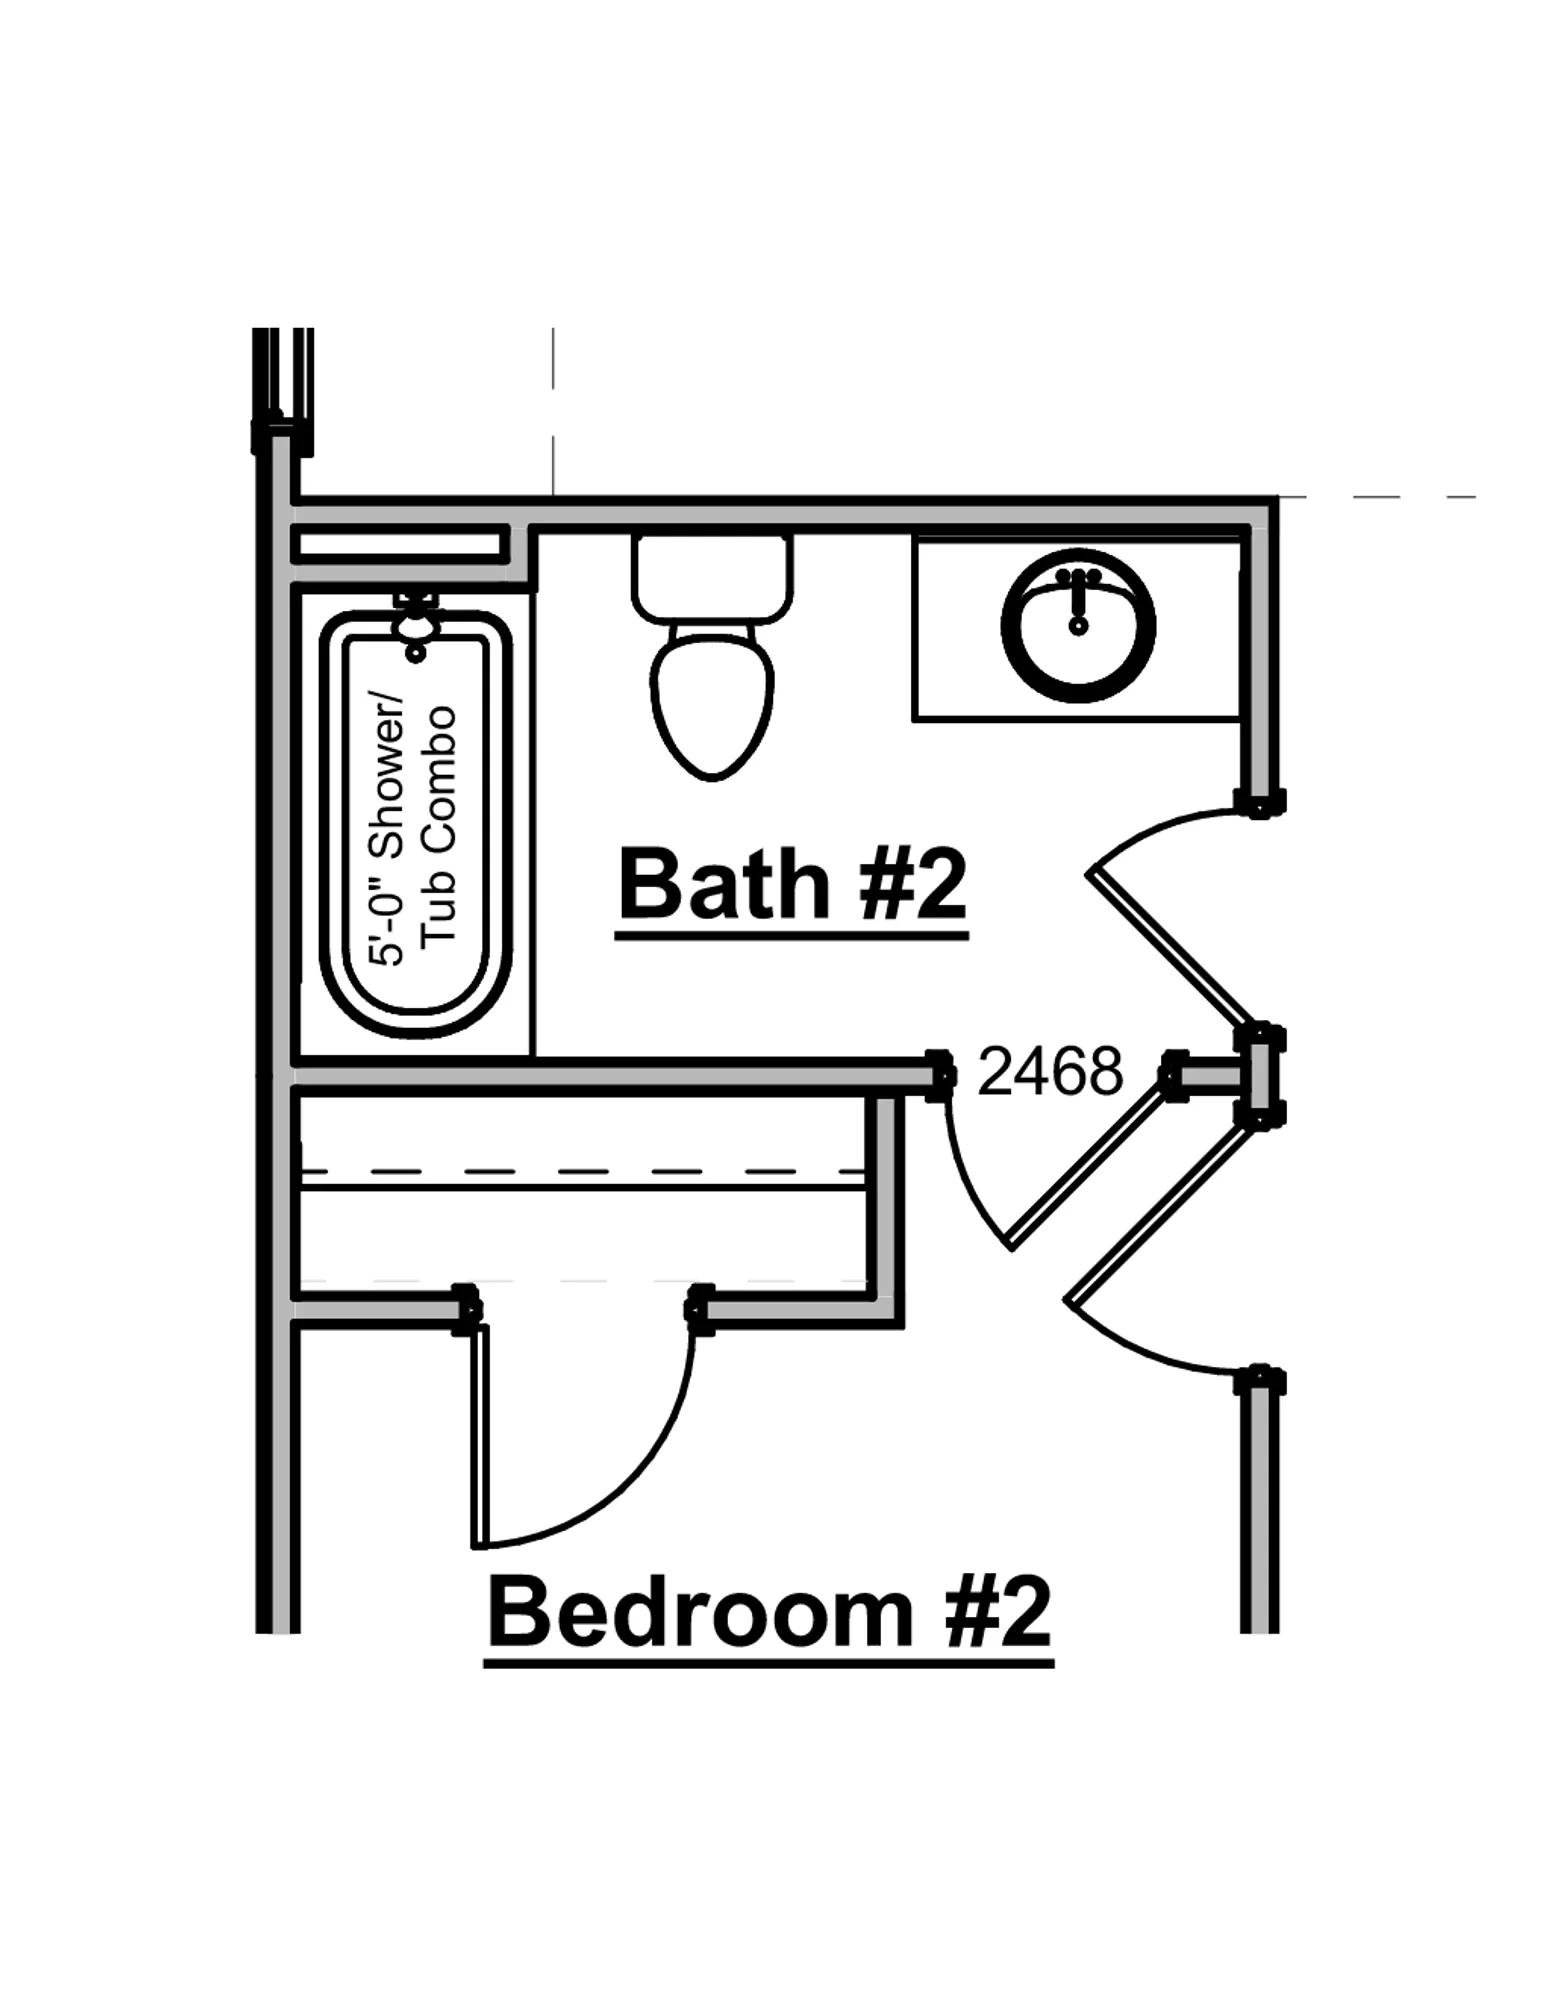 Bedroom 2 Bath Access - undefined